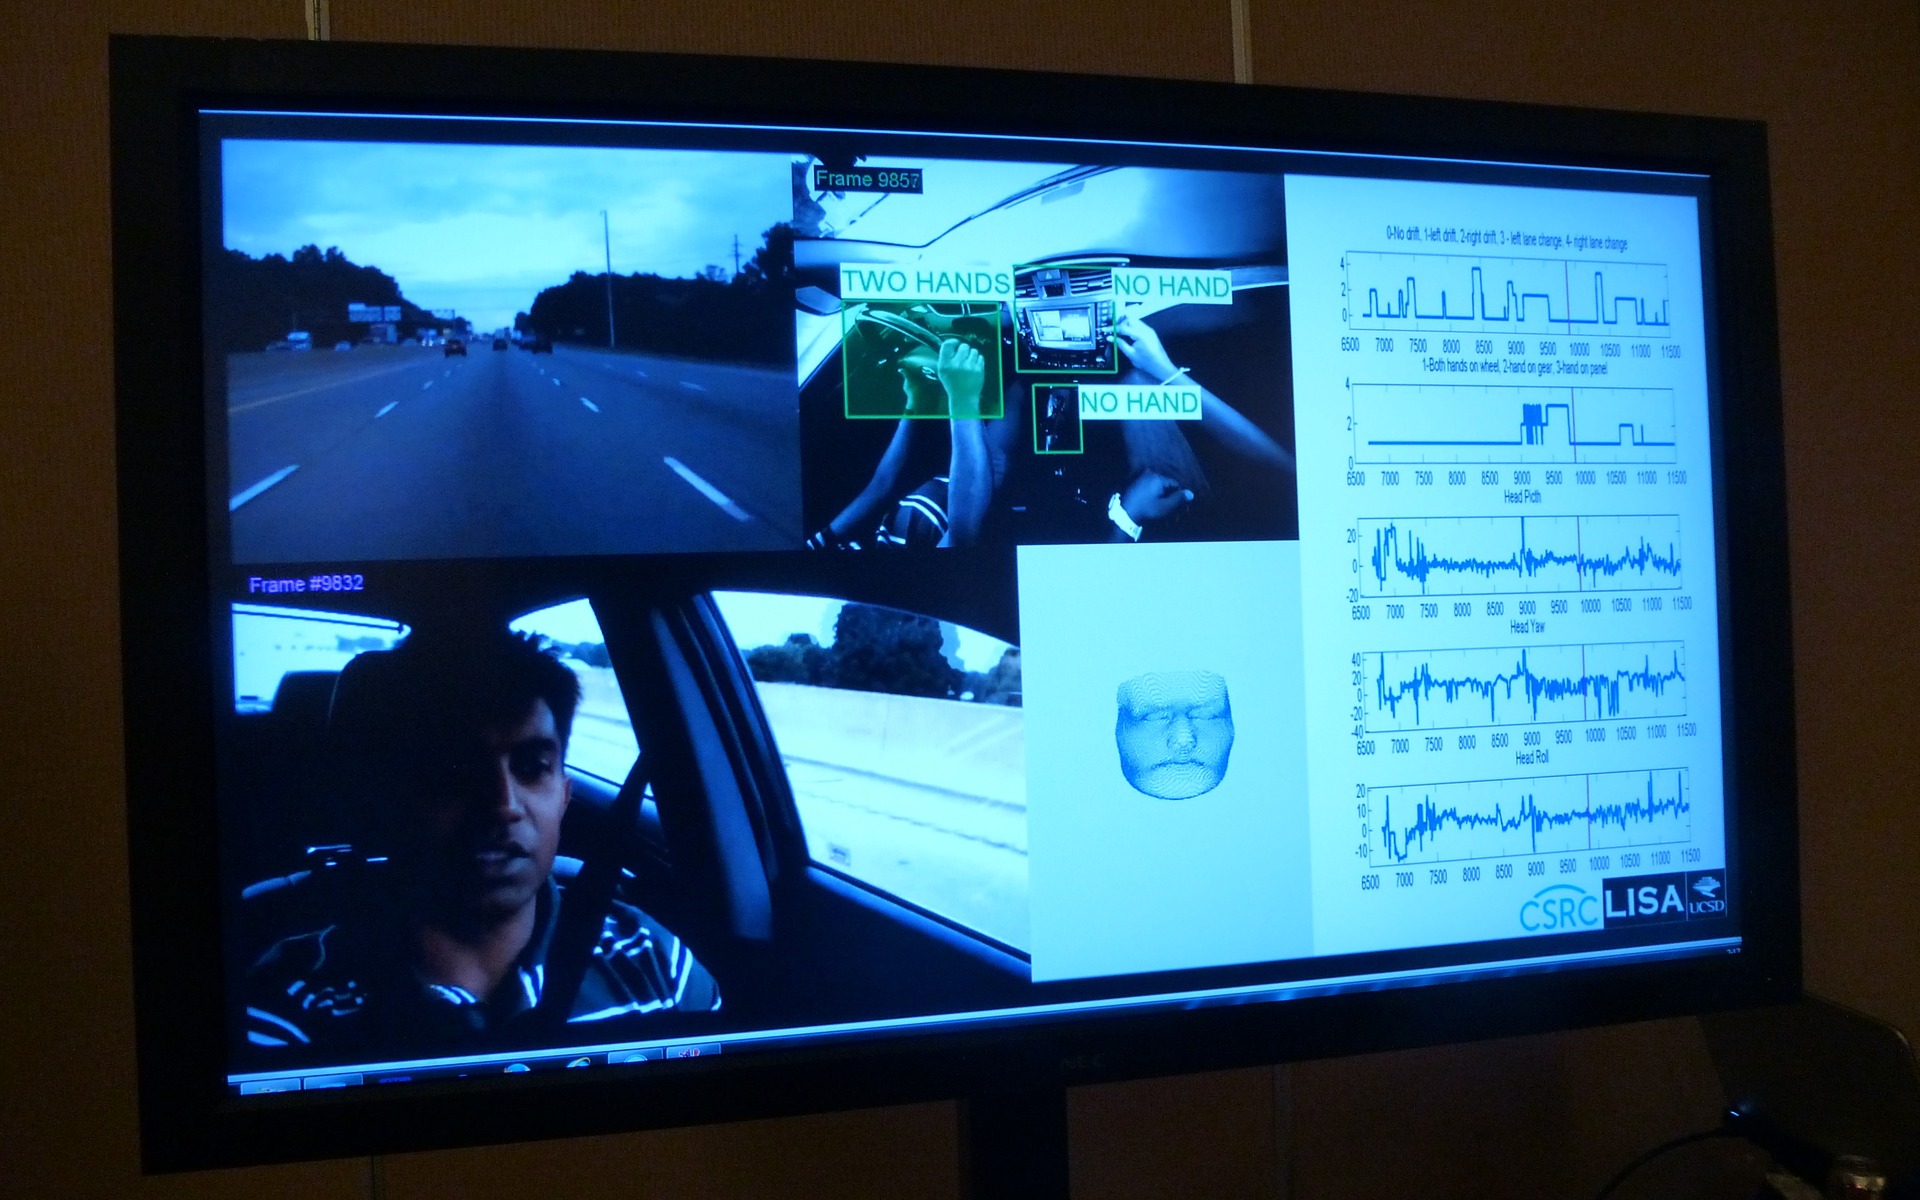 Study on facial recognition applied to driving (Toyota)